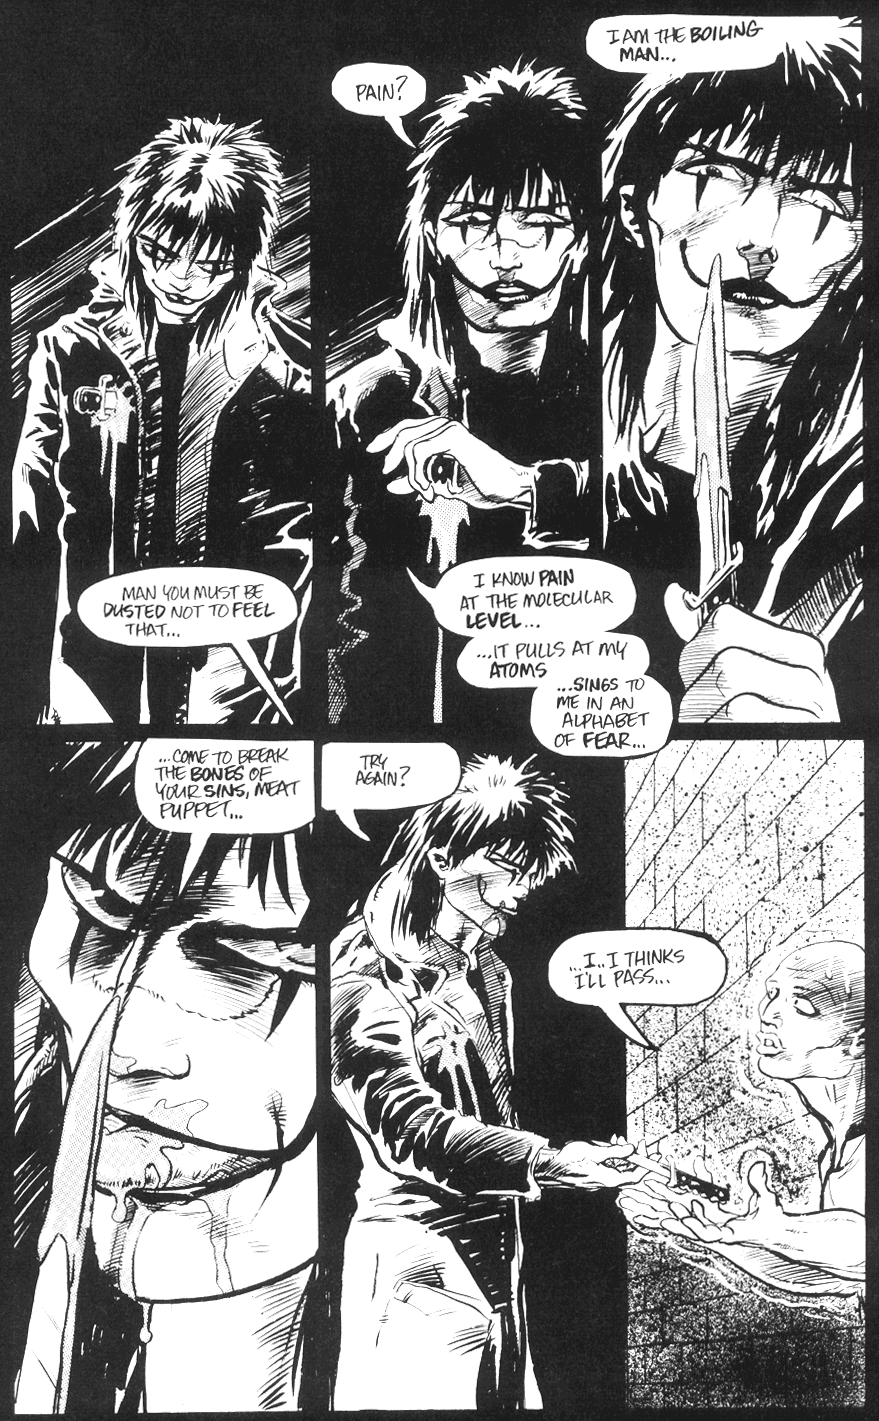 Eric Draven embraces his madness in The Crow Vol. 1 #1 "Pain" (1989), Caliber Press. Words and art by James O'Barr.